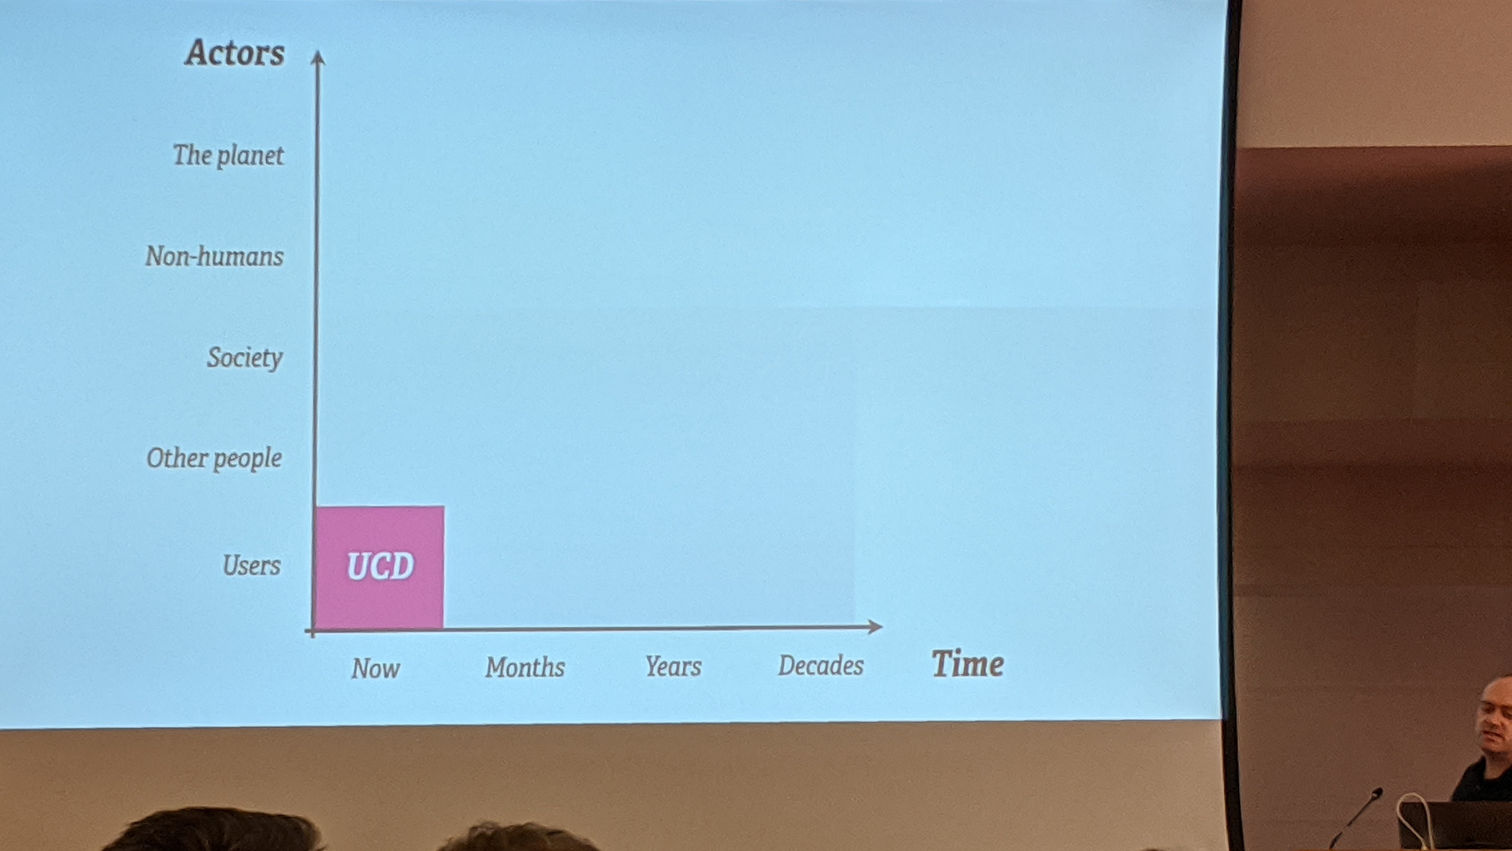 Slide from Cennydd Bowles's talk - A chart showing time on the x-axis (now, months, years, decades); actors on the y-axis (users, other people, society, non-humans, the planet), with UCD occupying a small square in the bottom-right (now, users)